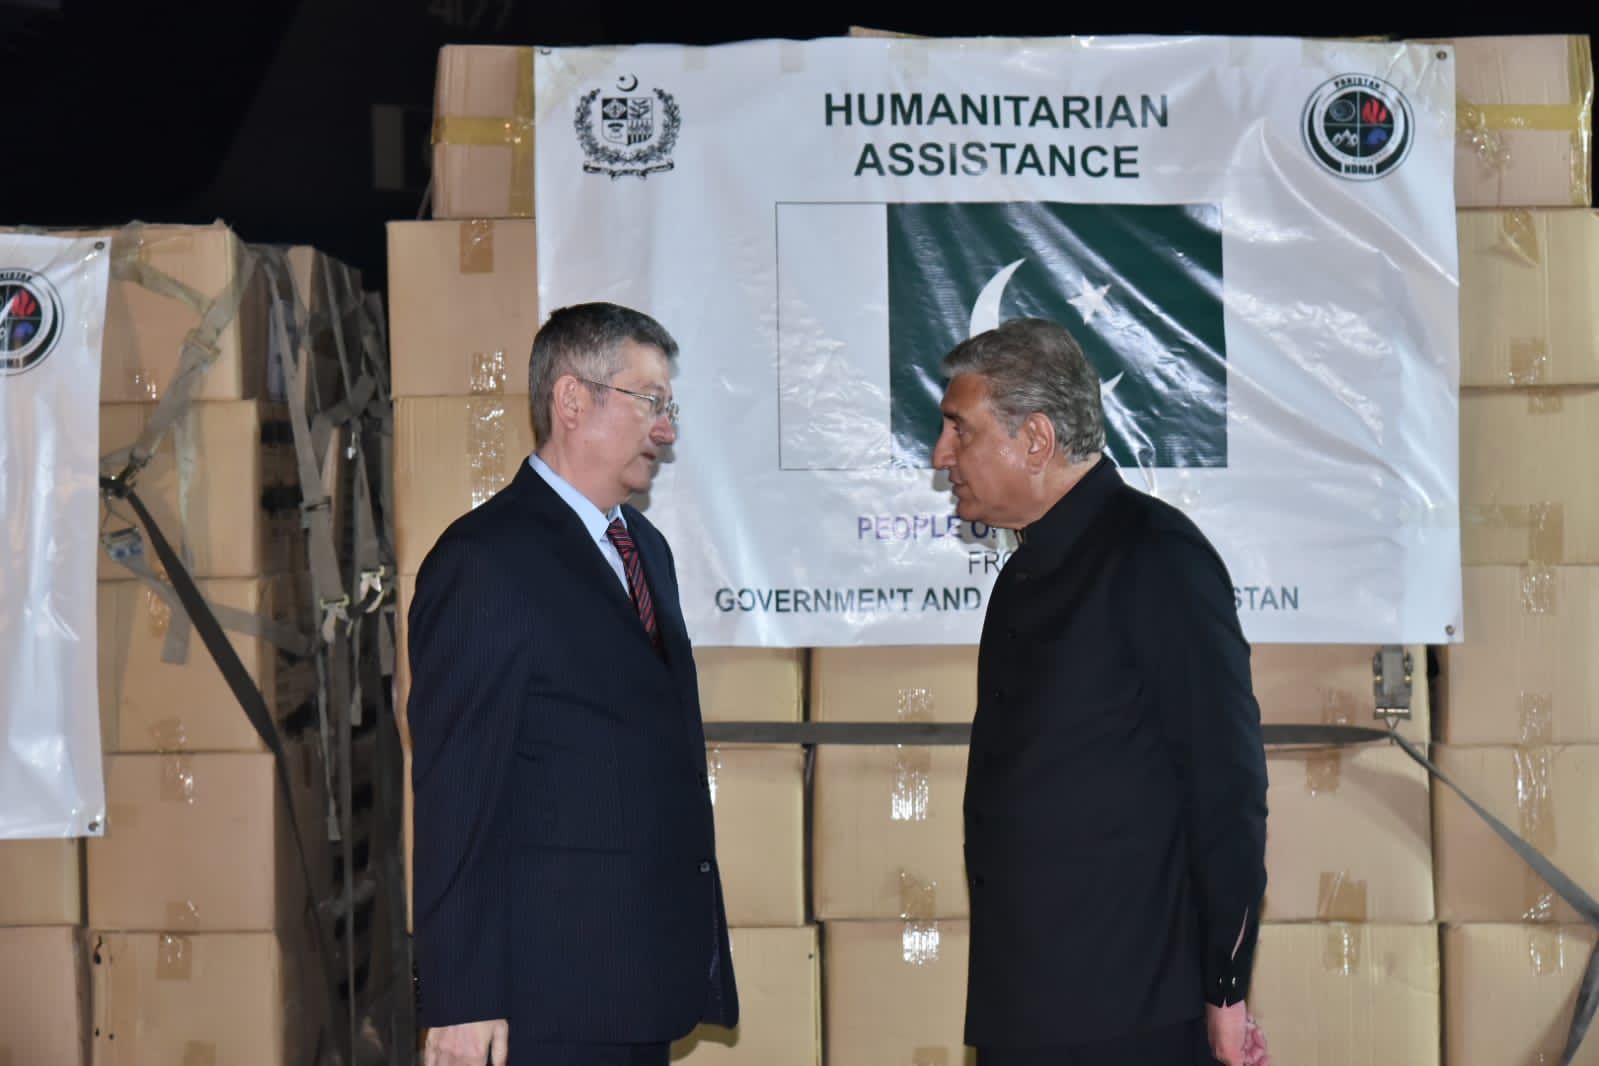 Government of Pakistan is sending humanitarian assistance to the people of Ukraine